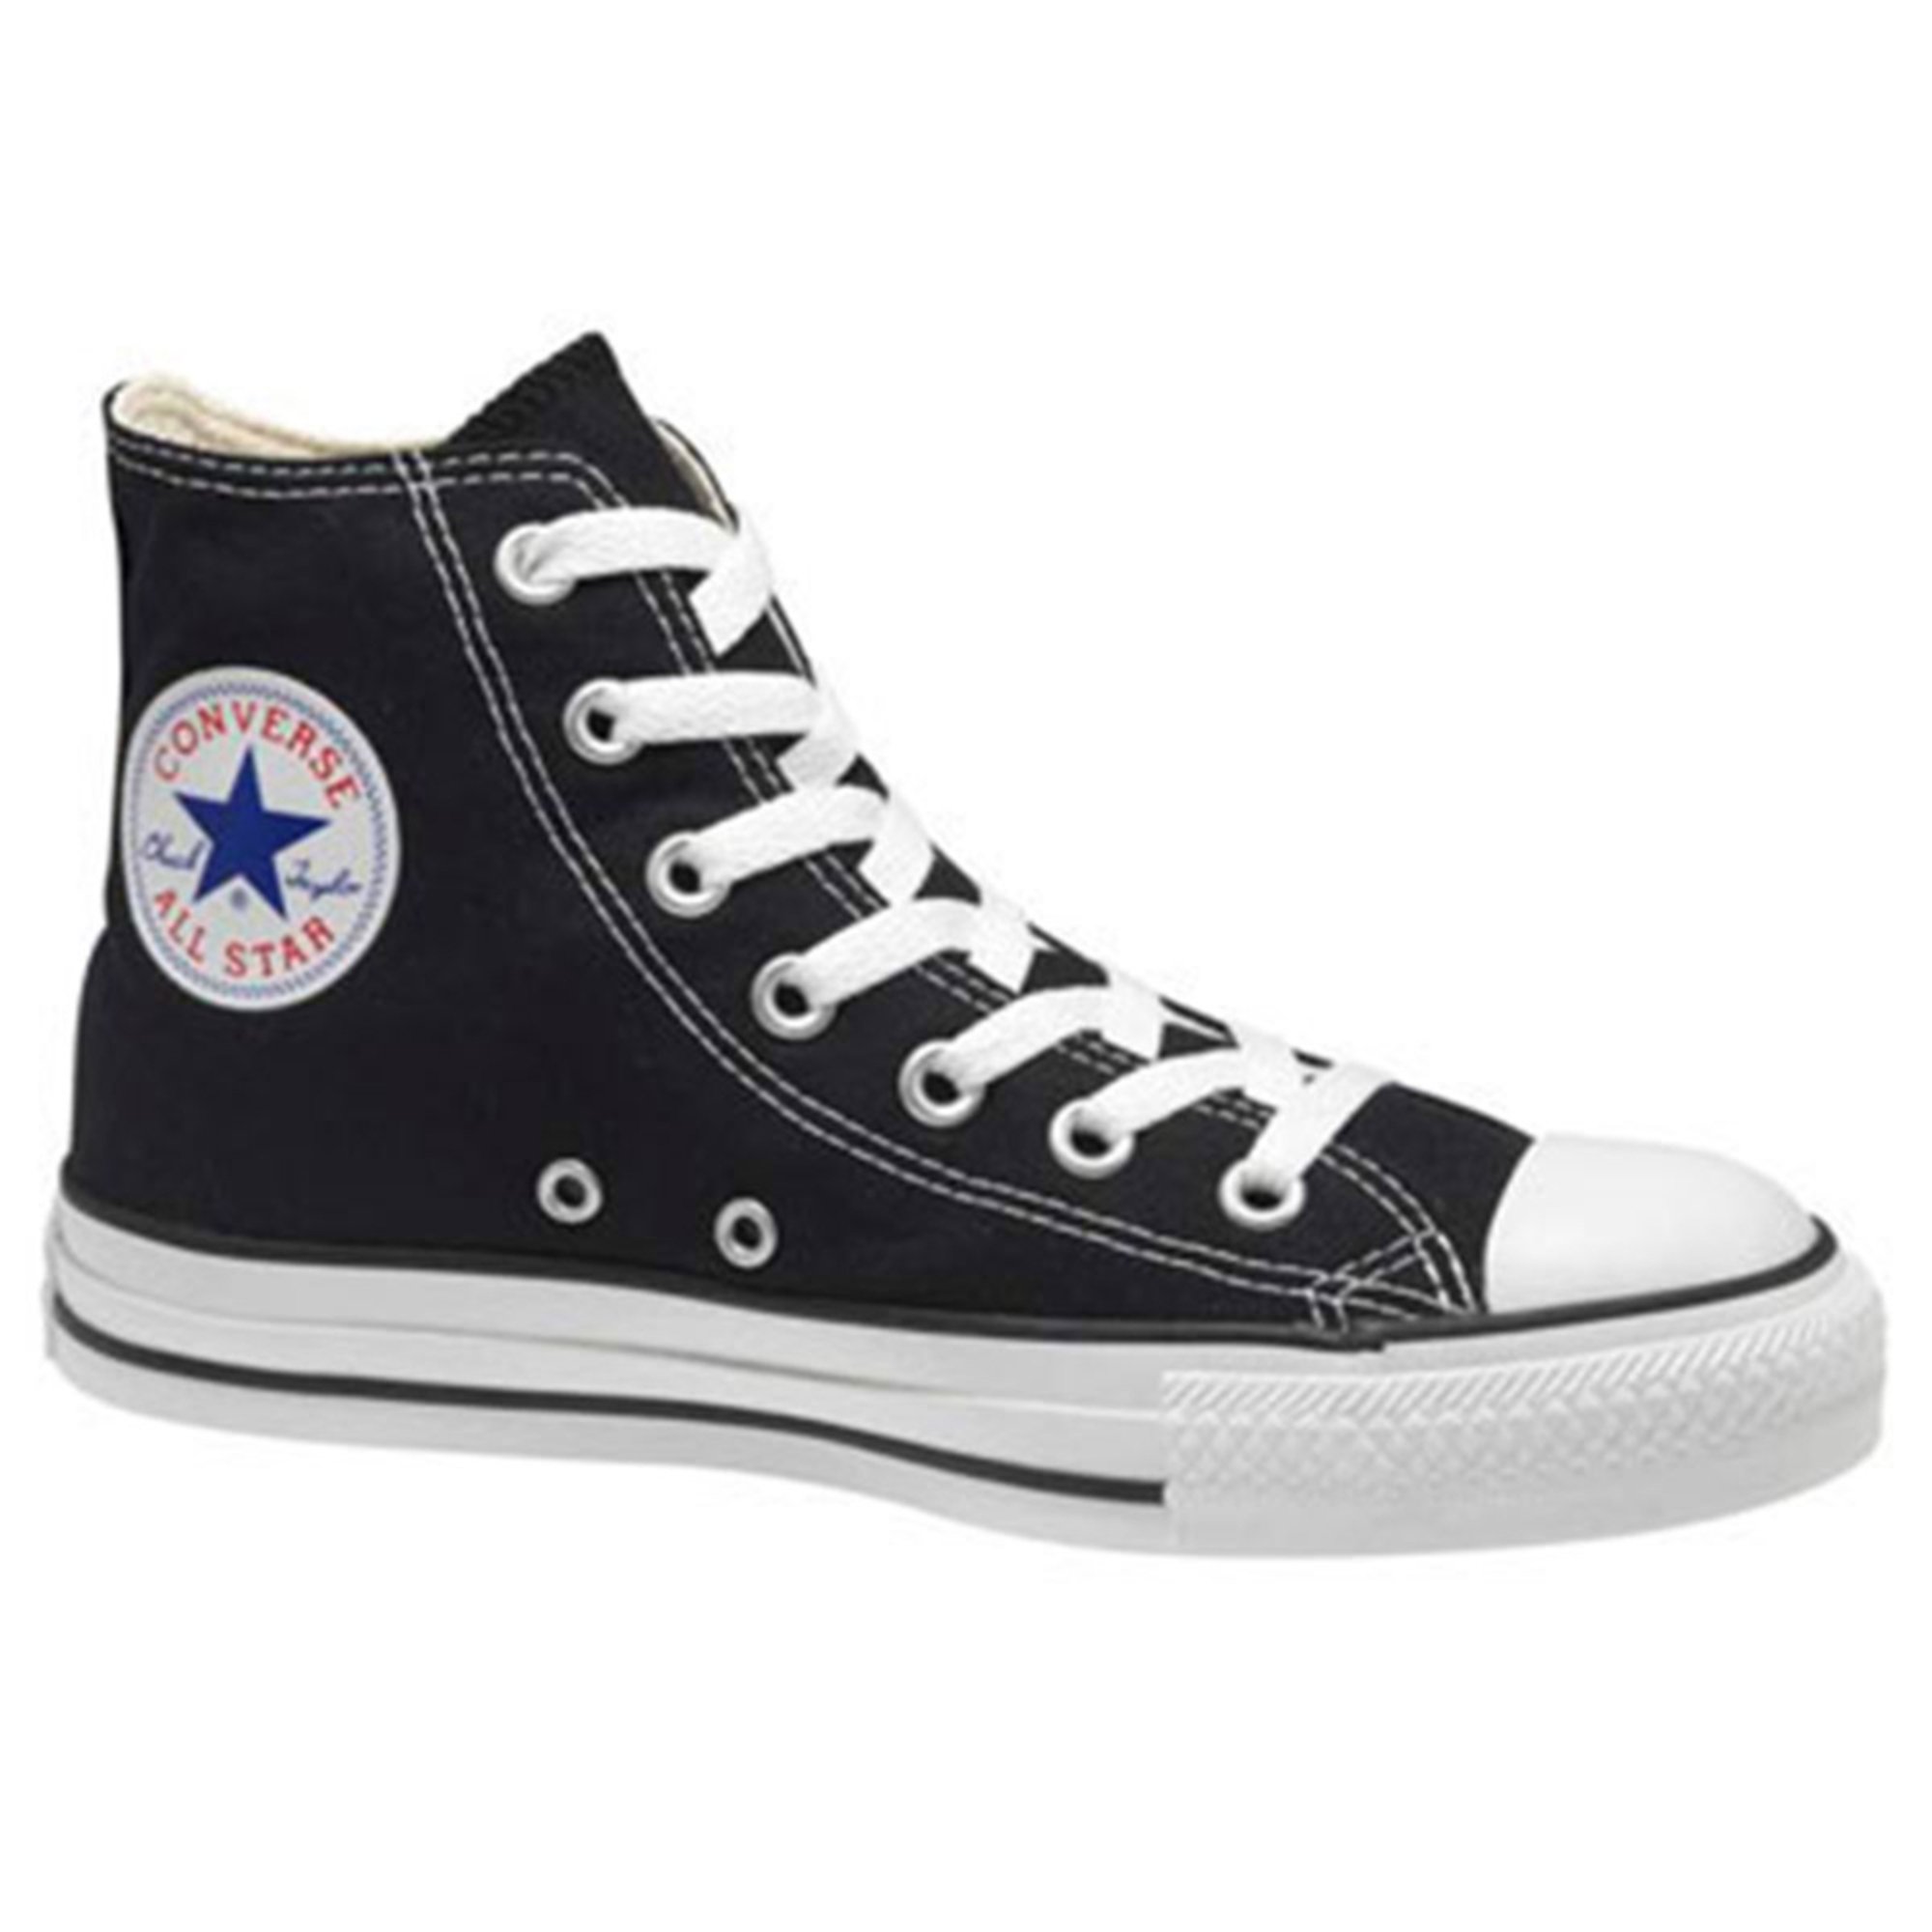 converse classic basketball shoes